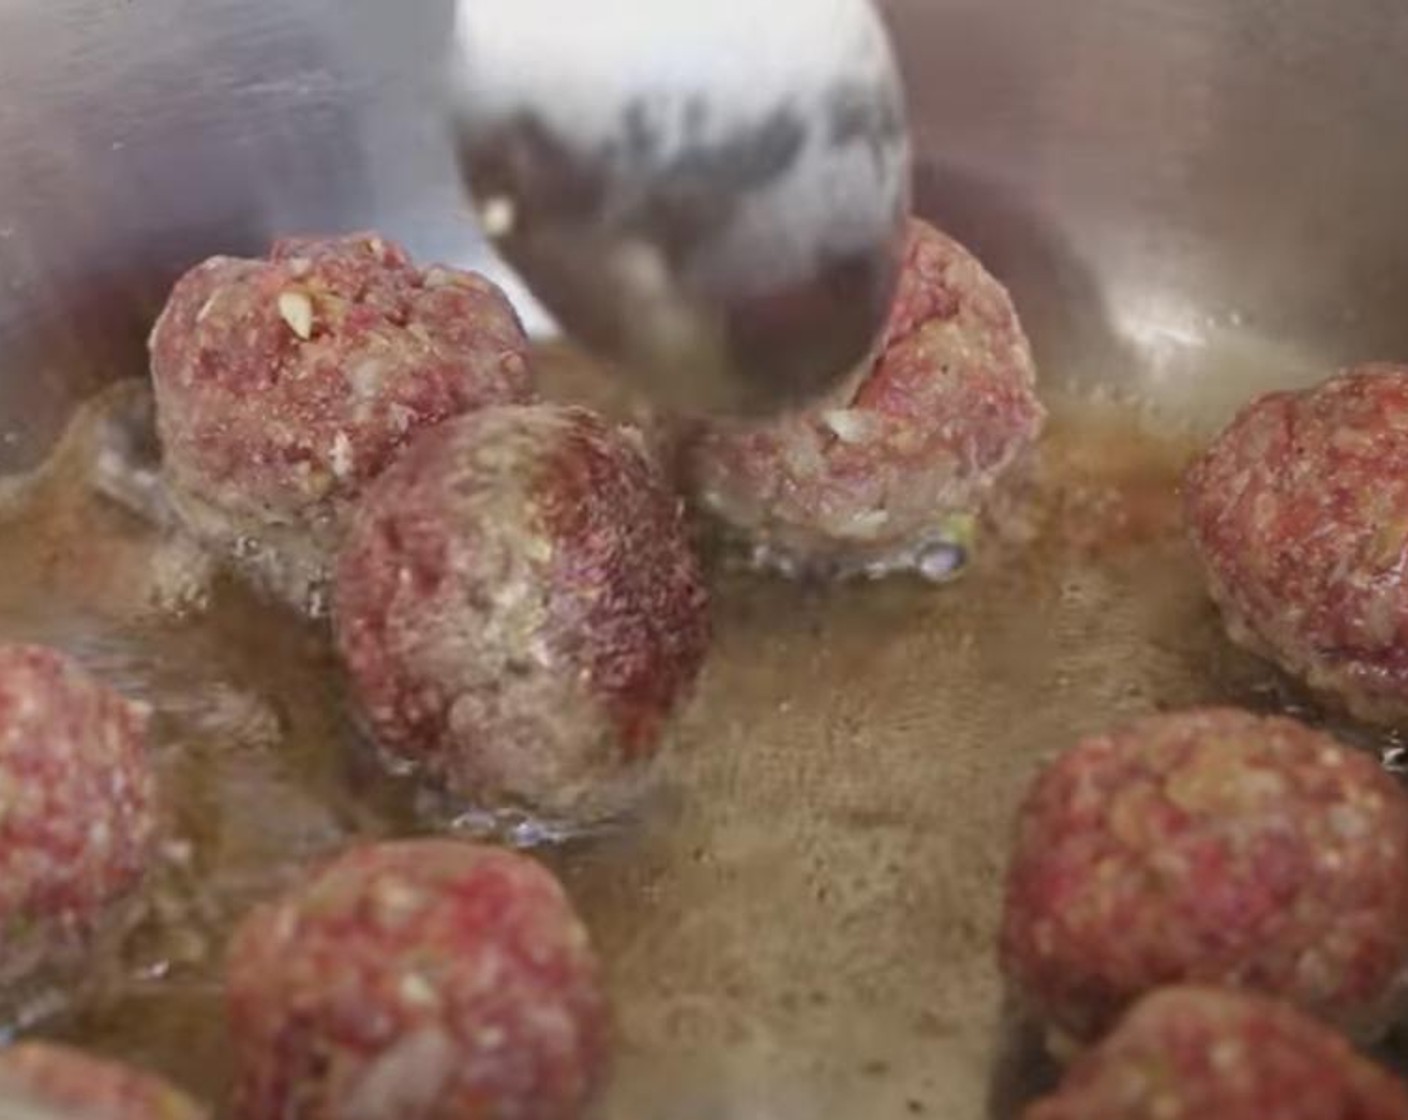 step 4 Add Cooking Oil (1 Tbsp) to a pan on medium-high heat. Once heated, add meatballs to the pan in batches. After a few minutes, rotate meatballs to cook all sides evenly.